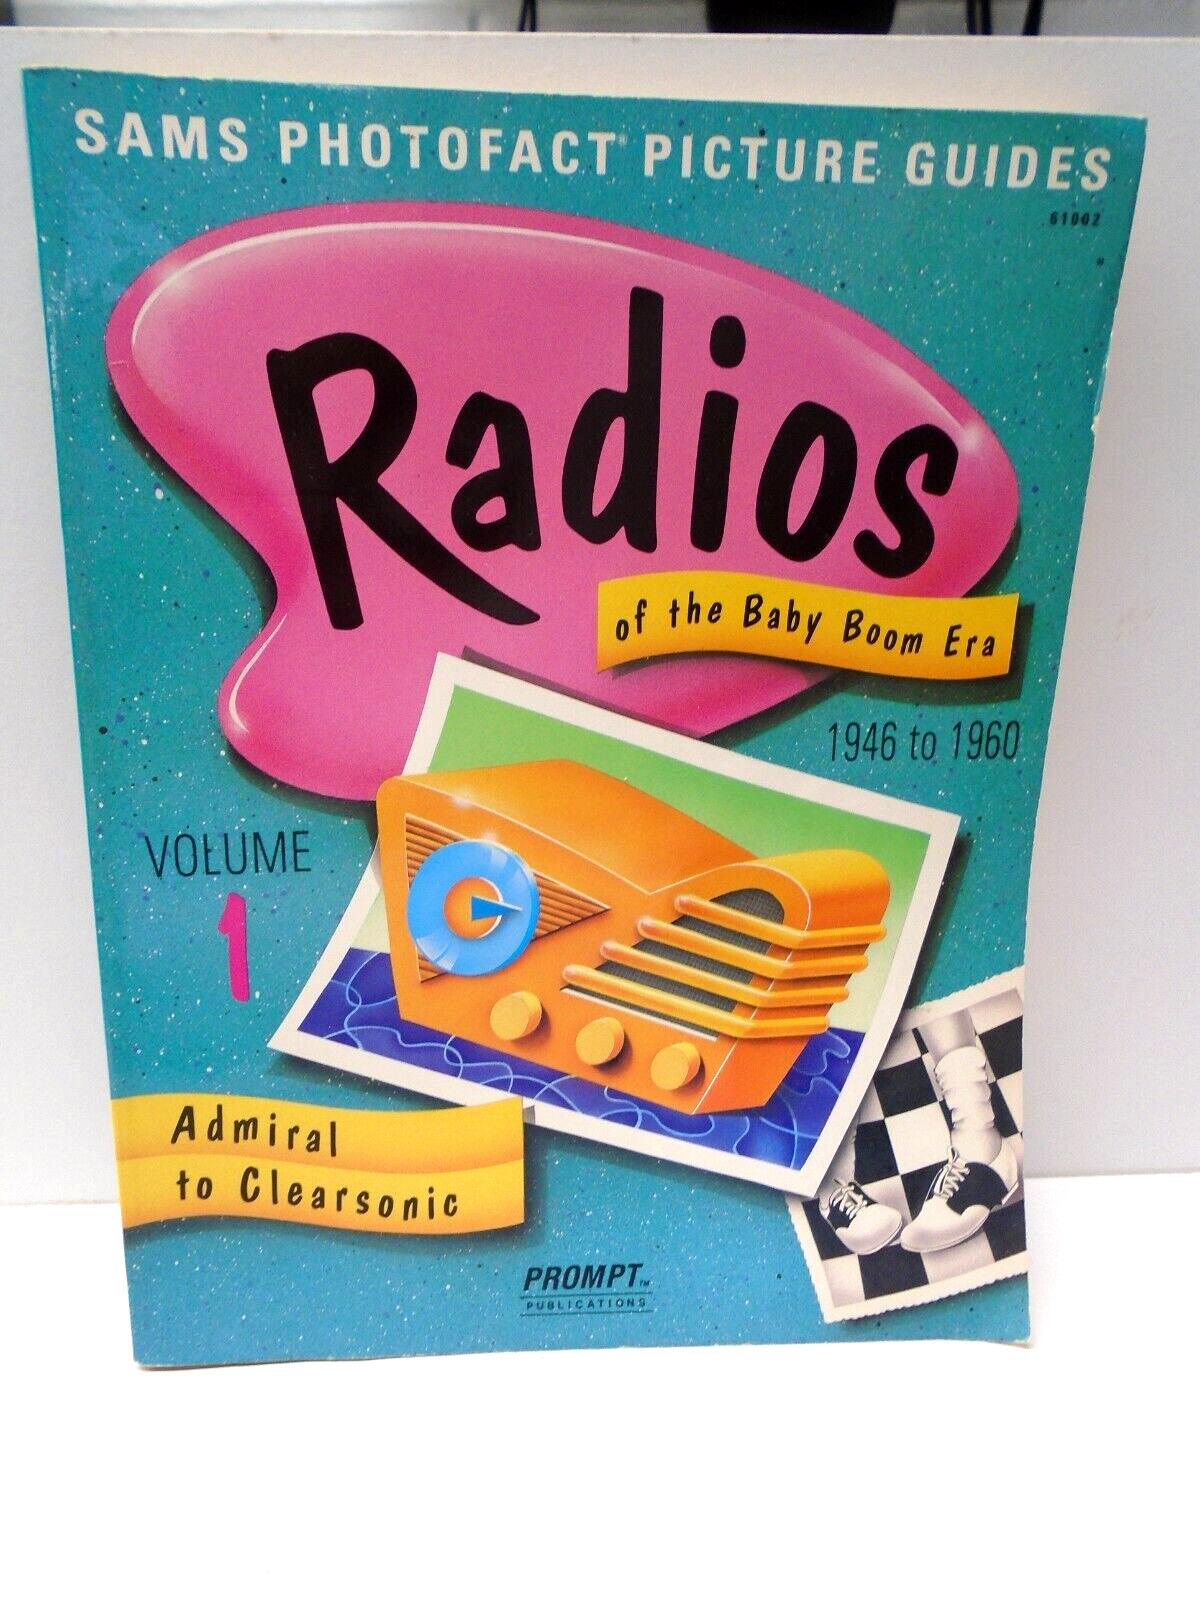 SAMS PHOTOFACT PICTURE GUIDES, RADIOS OF THE BABY BOOM ERA ALL (6) VOLUMES